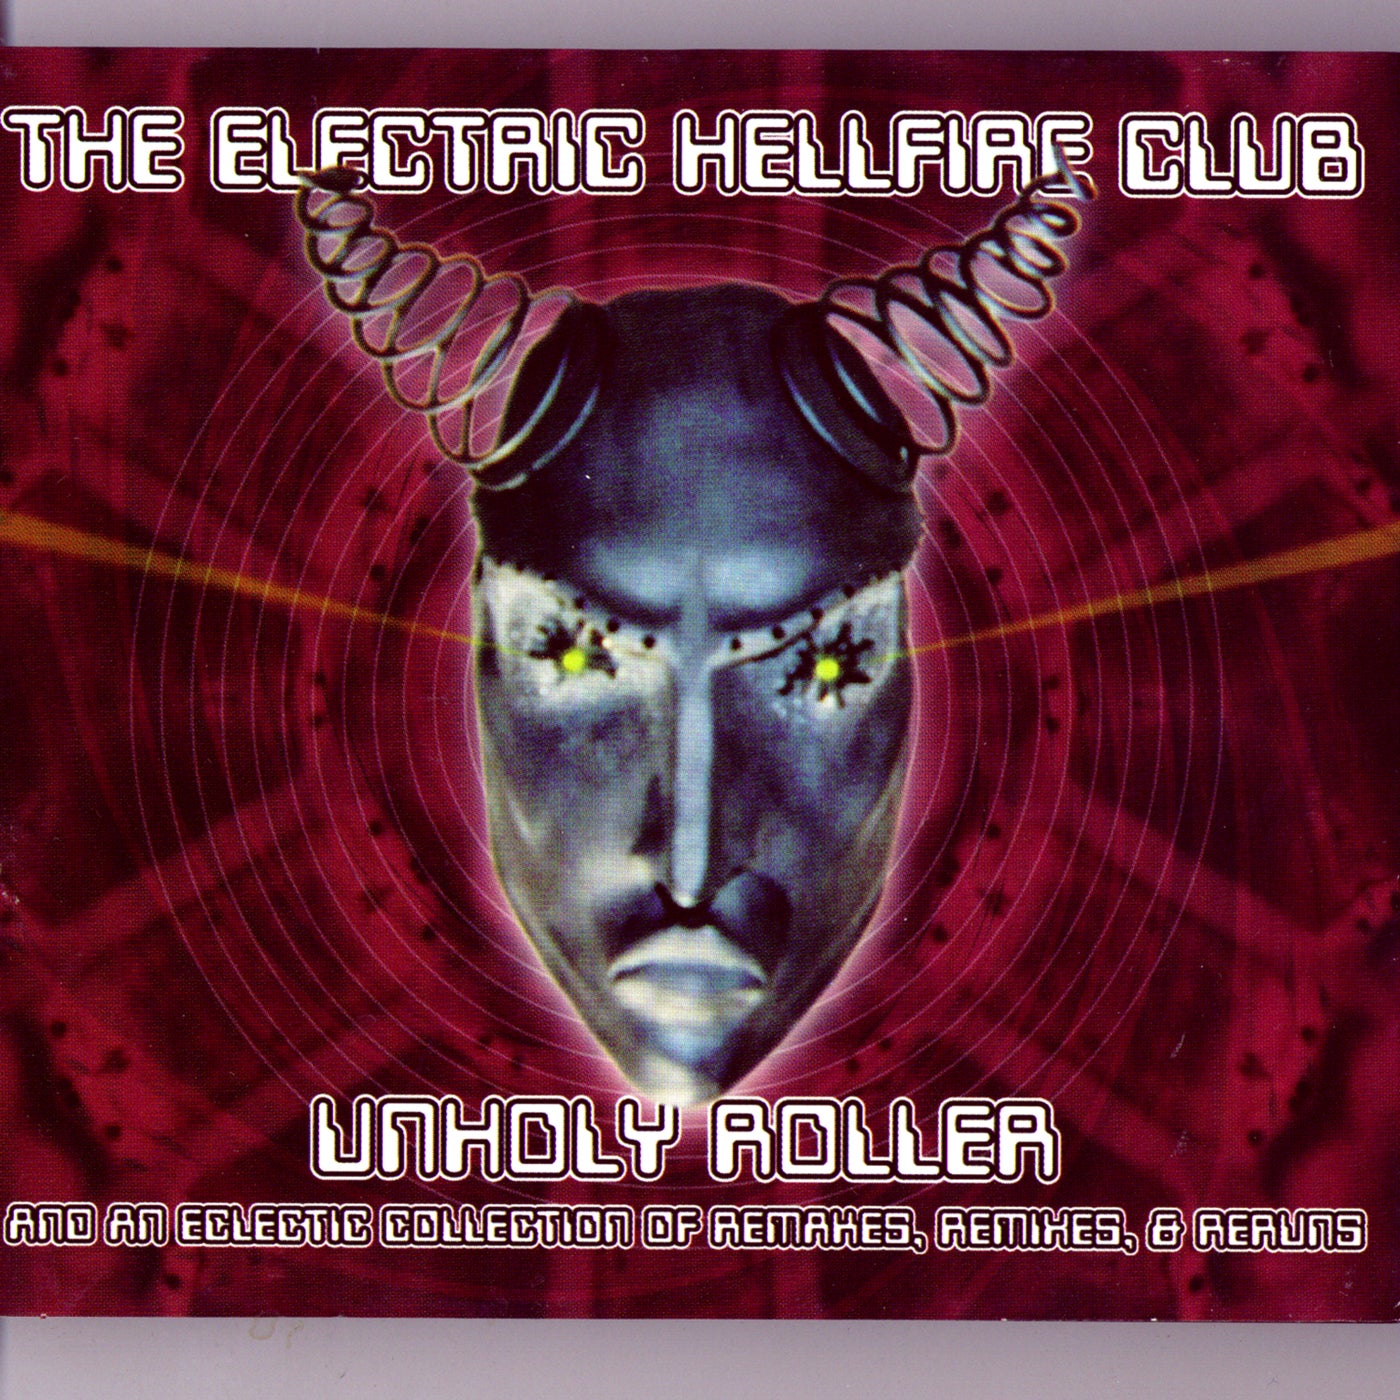 Unholy Roller by The Electric Hellfire Club on Beatsource